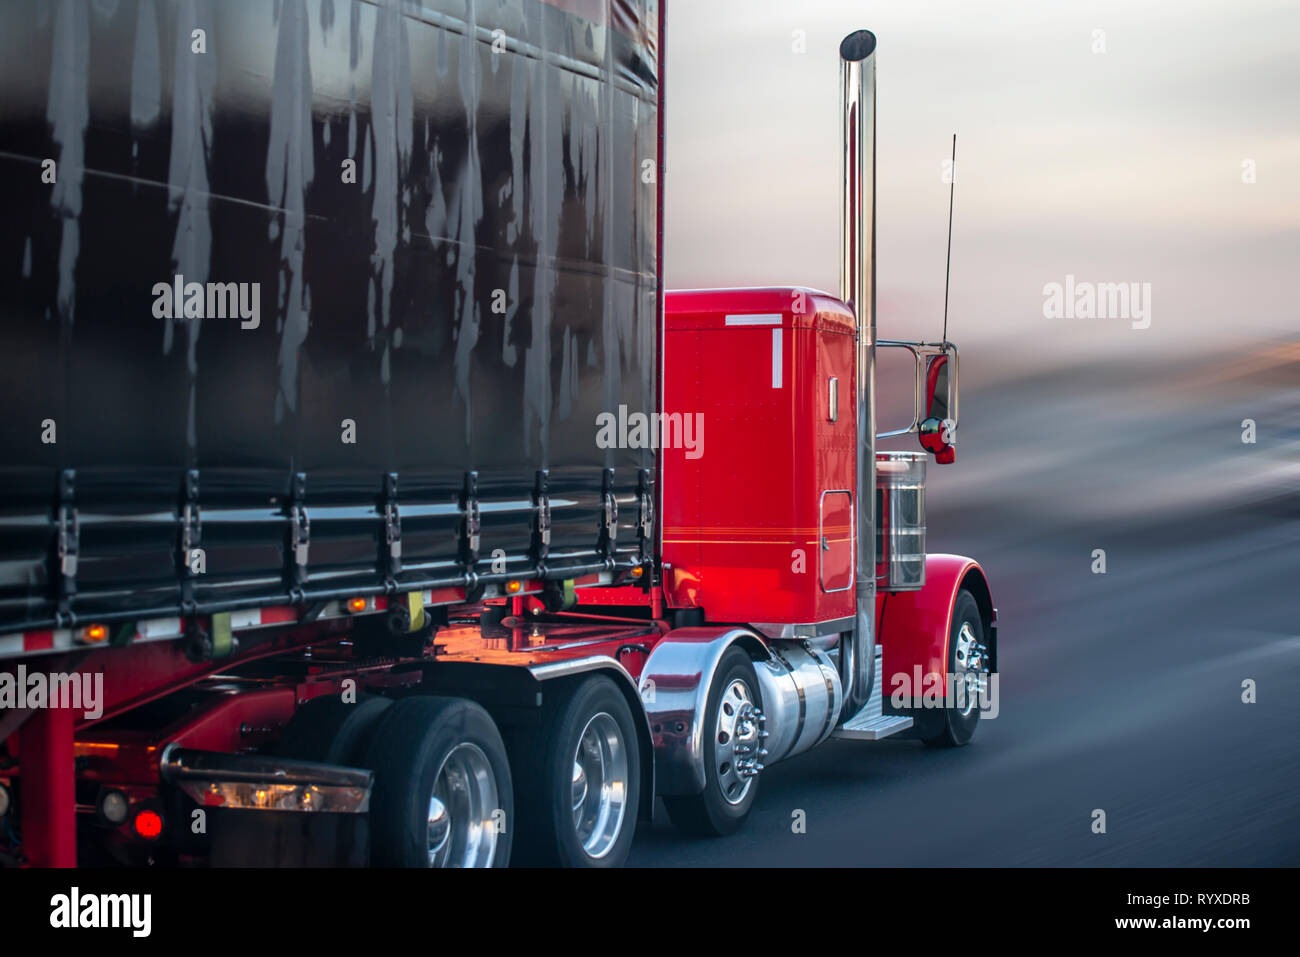 https://c8.alamy.com/comp/RYXDRB/big-rig-red-american-classic-bonnet-long-hauler-semi-truck-with-rubberized-fabric-covered-black-semi-trailer-moving-on-wet-raining-road-with-rain-dust-RYXDRB.jpg